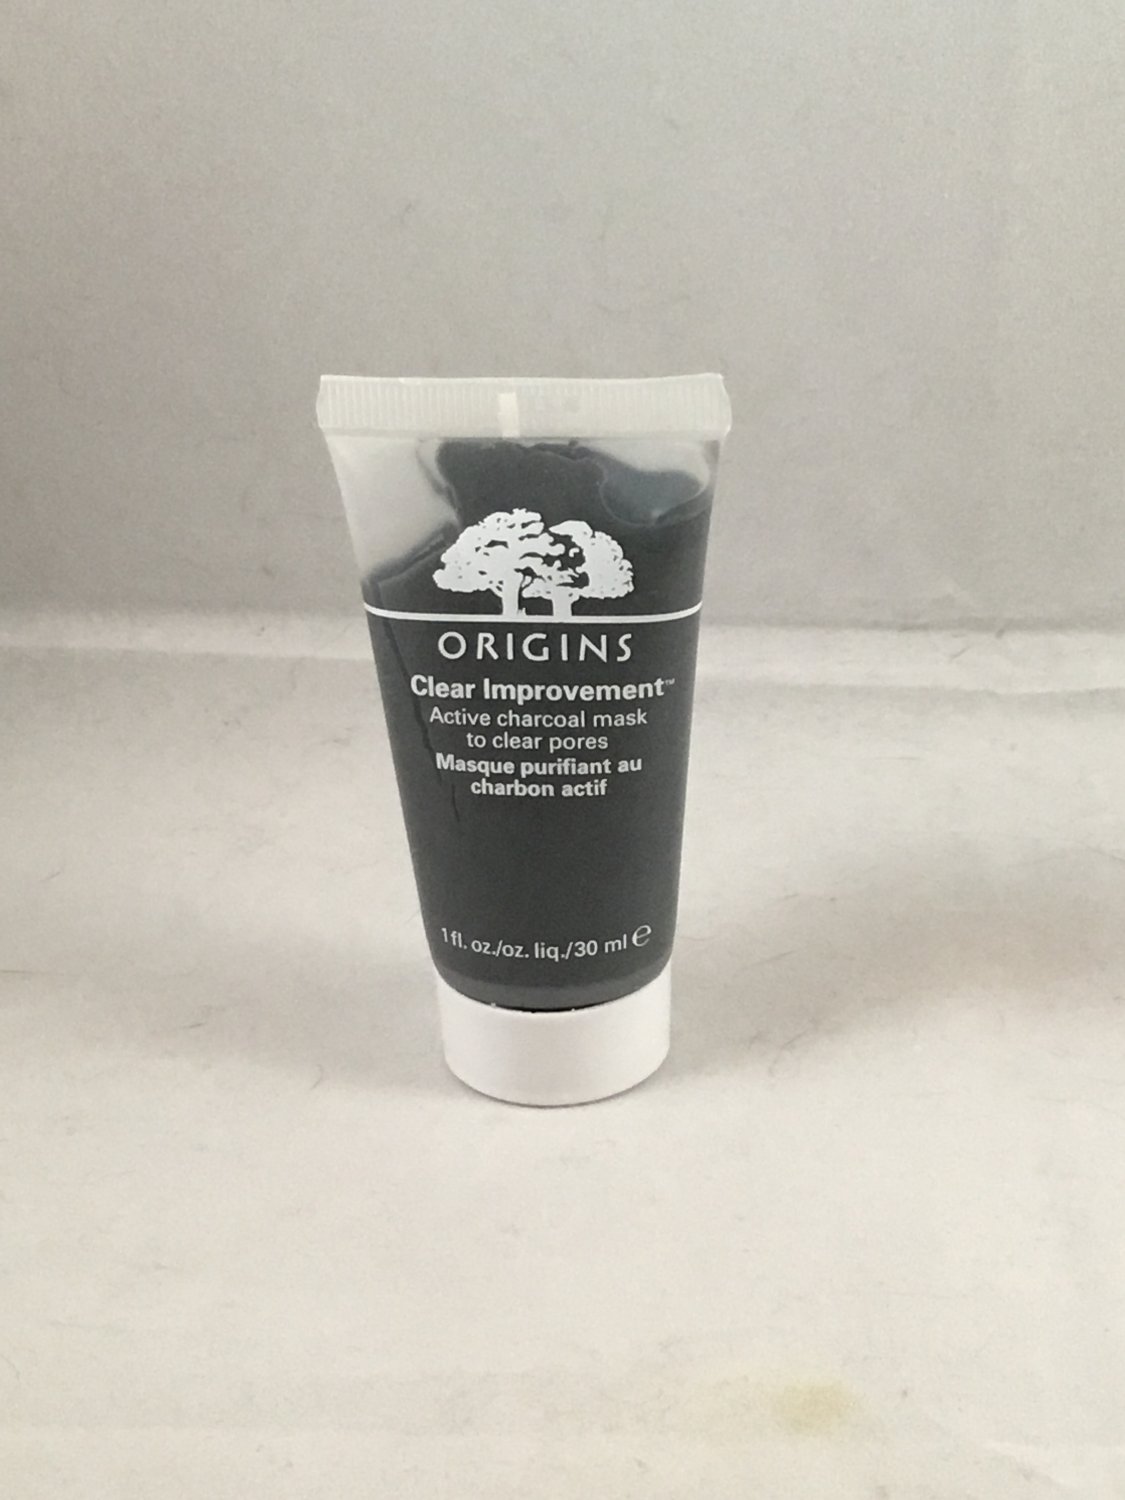 Origins Clear Improvement Active Charcoal Mask to Clear Pores Travel Size